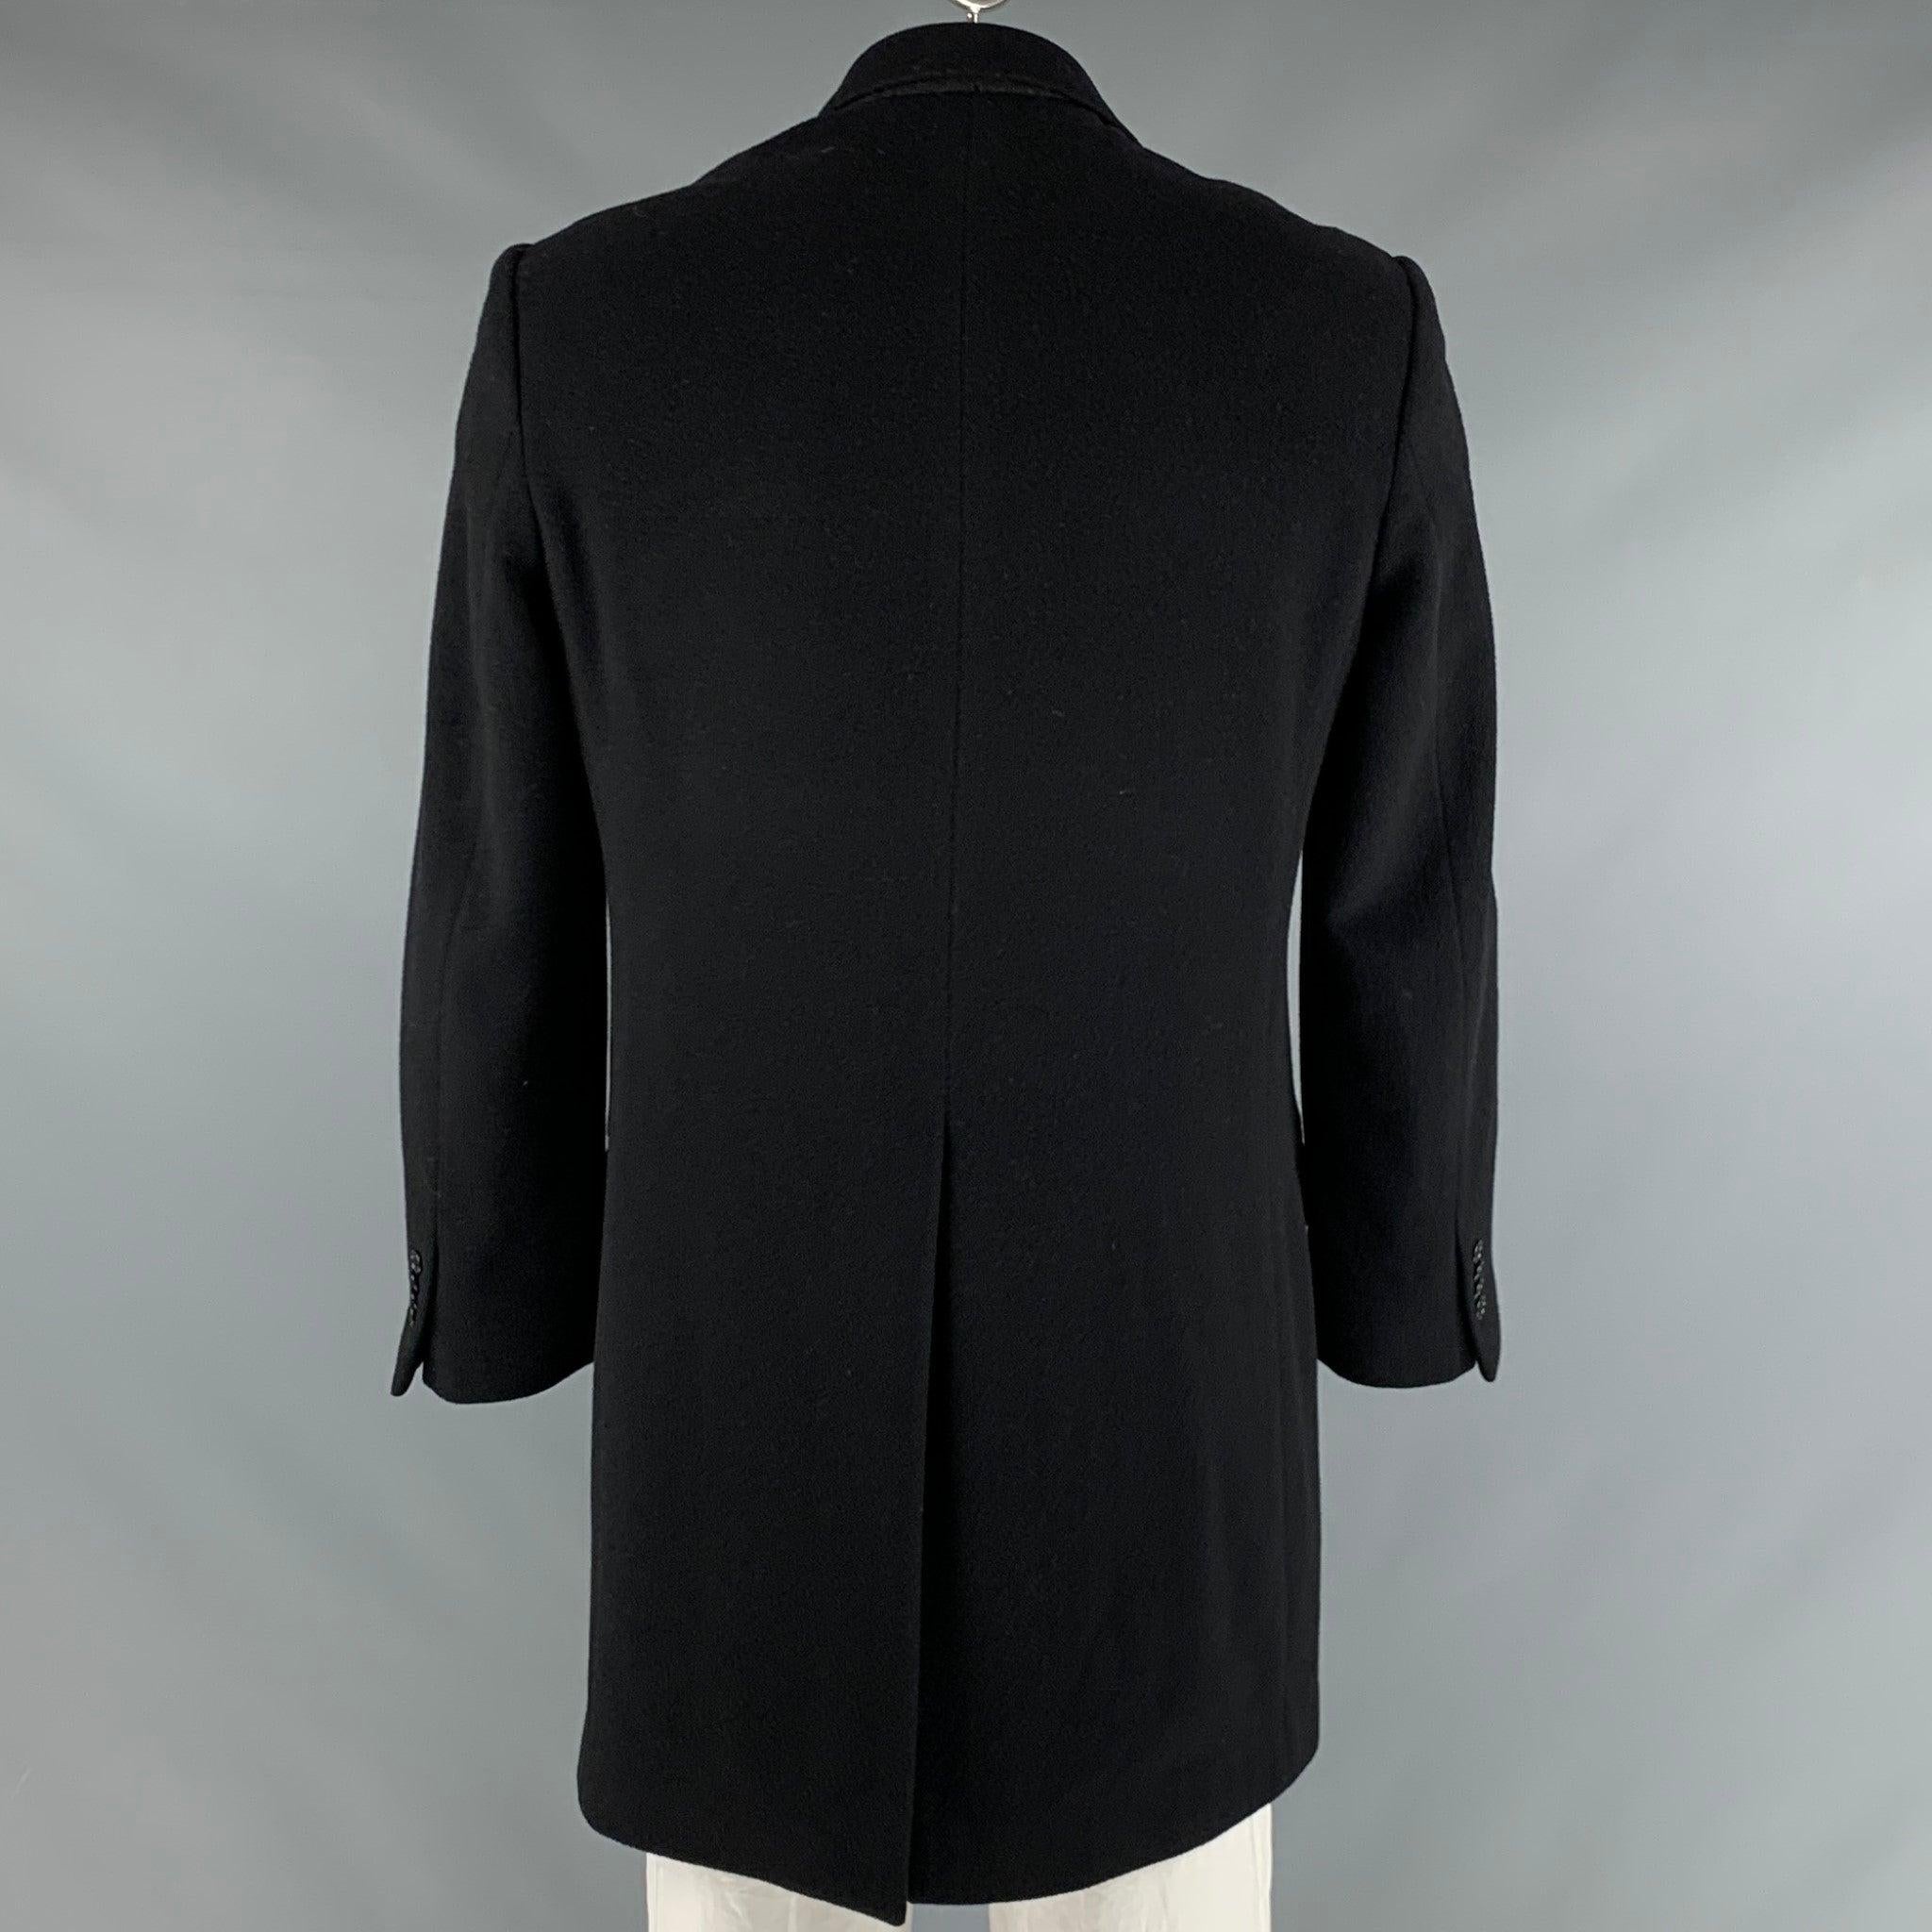 YVES SAINT LAURENT Size 42 Black Wool Blend Single Breasted Coat In Good Condition For Sale In San Francisco, CA